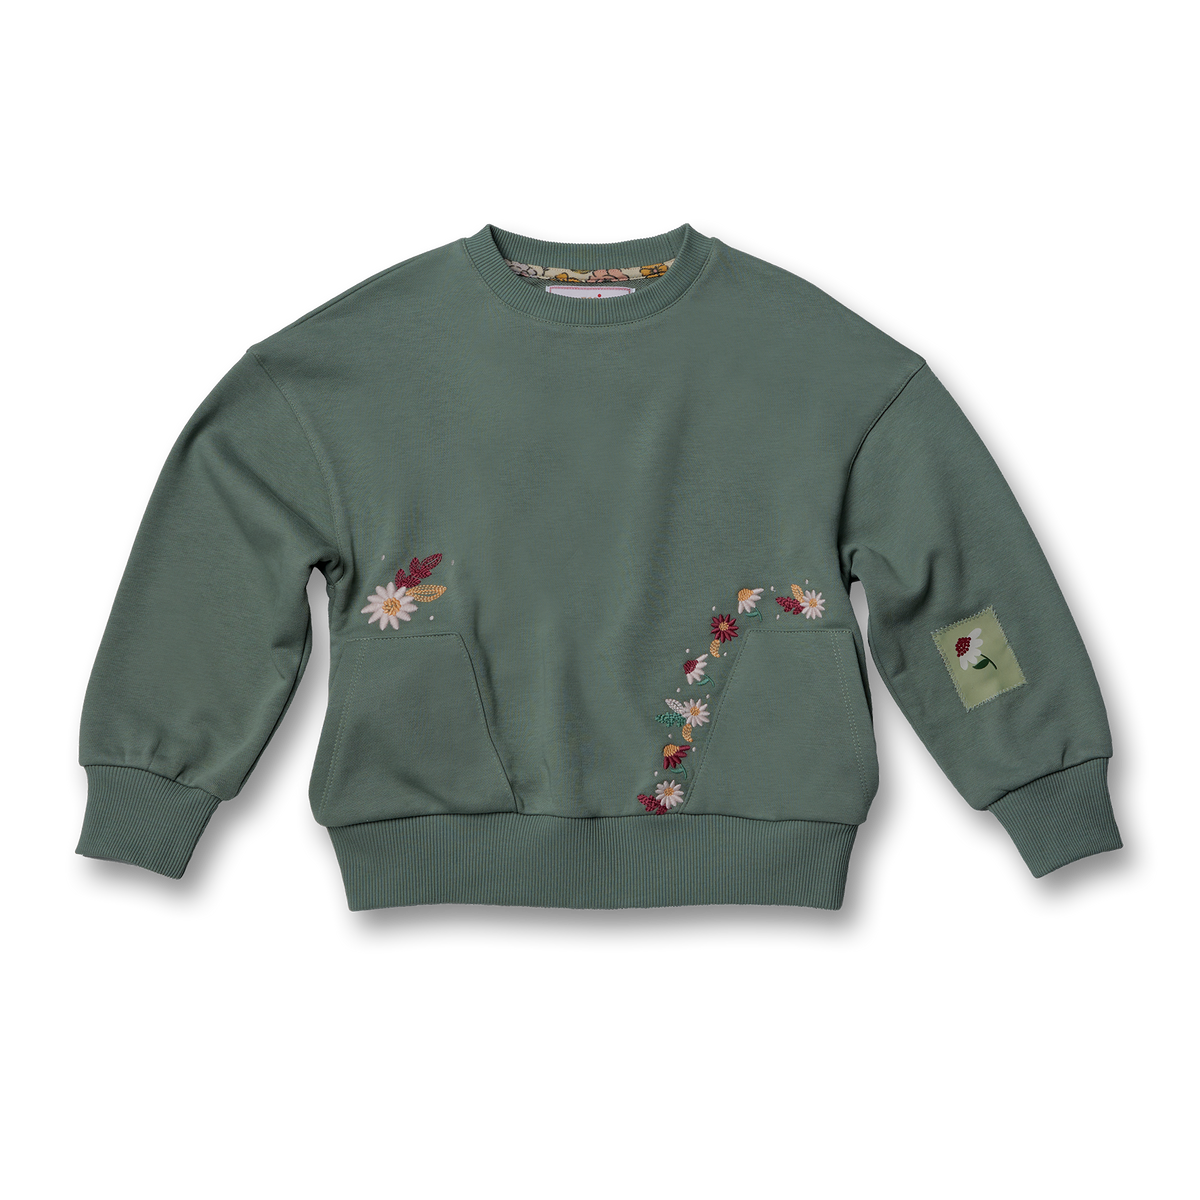 Green Floral Embroidered Sweatshirt